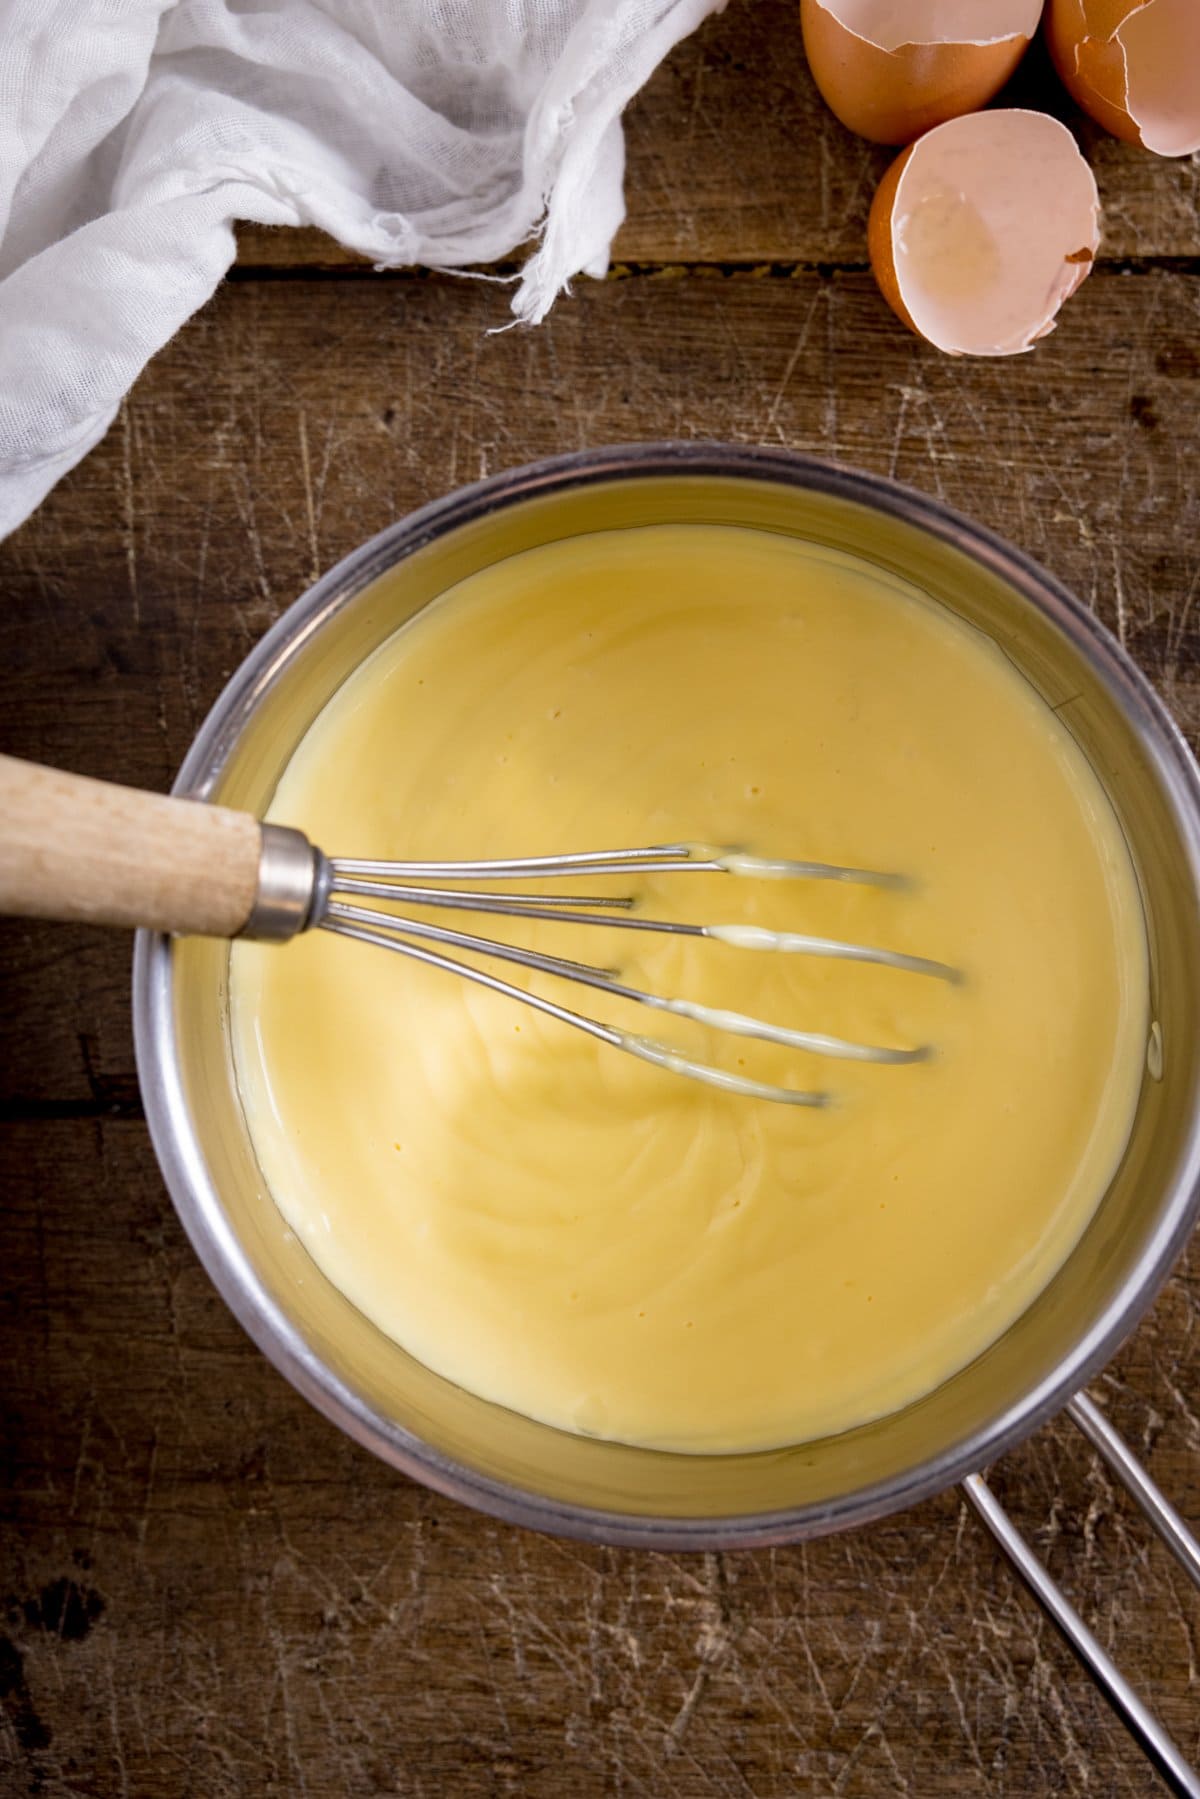 A close up of a big bowl of custard being whisked on a wooden table